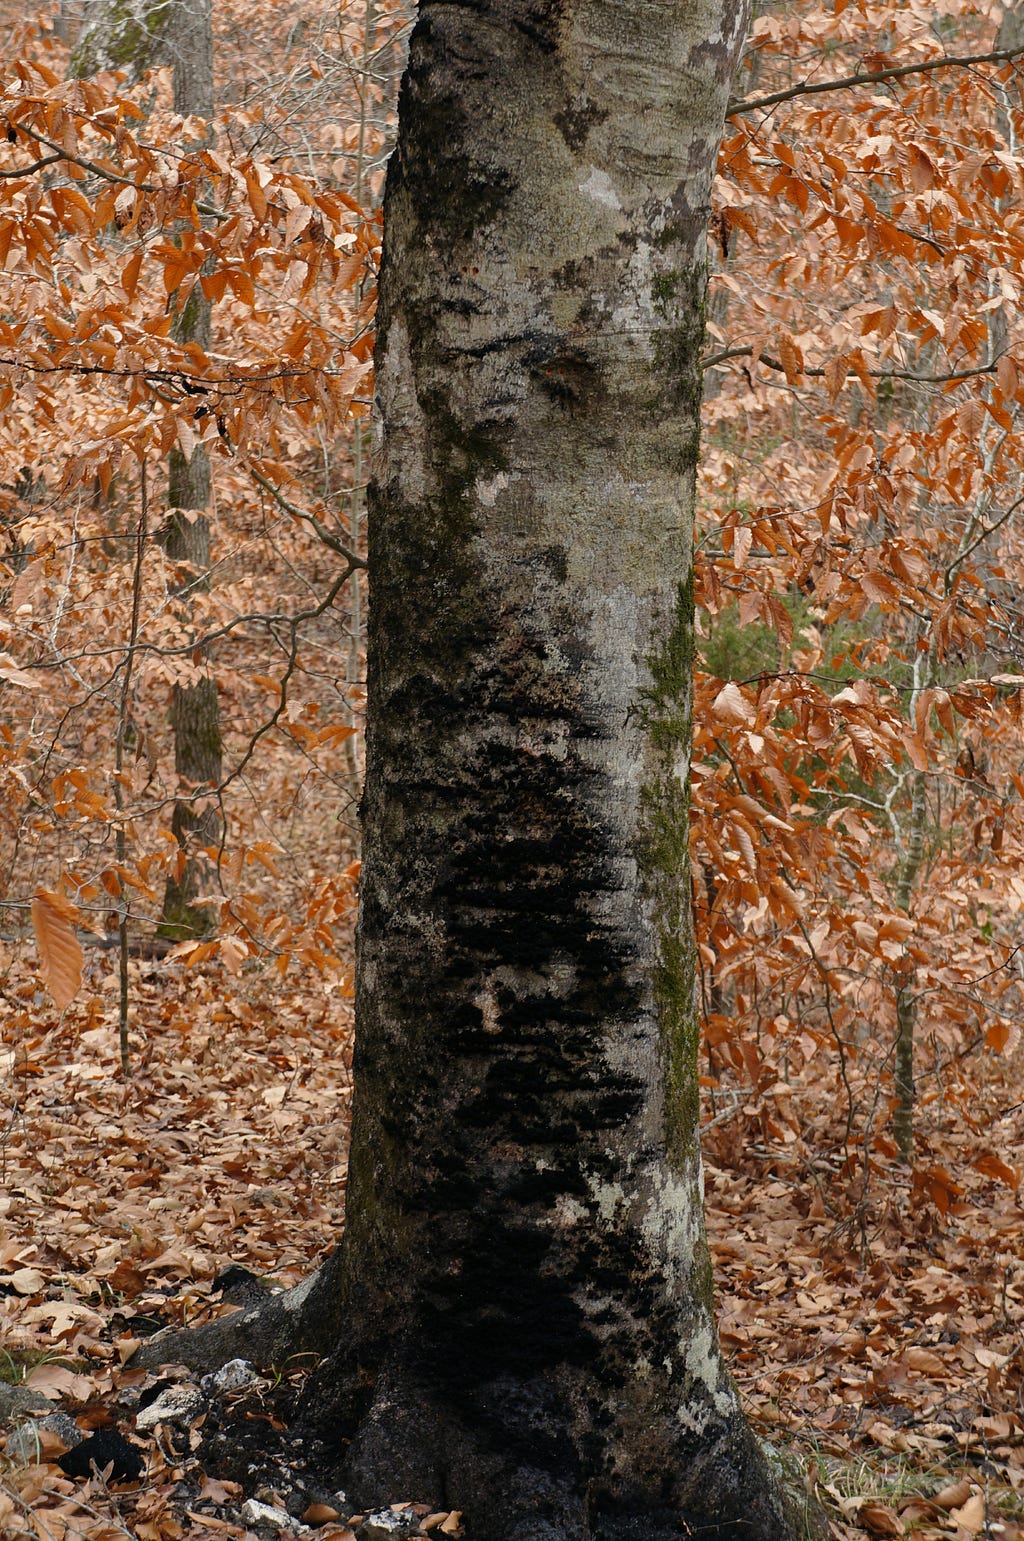 a large tree trunk with large patches of black sooty mold covering it